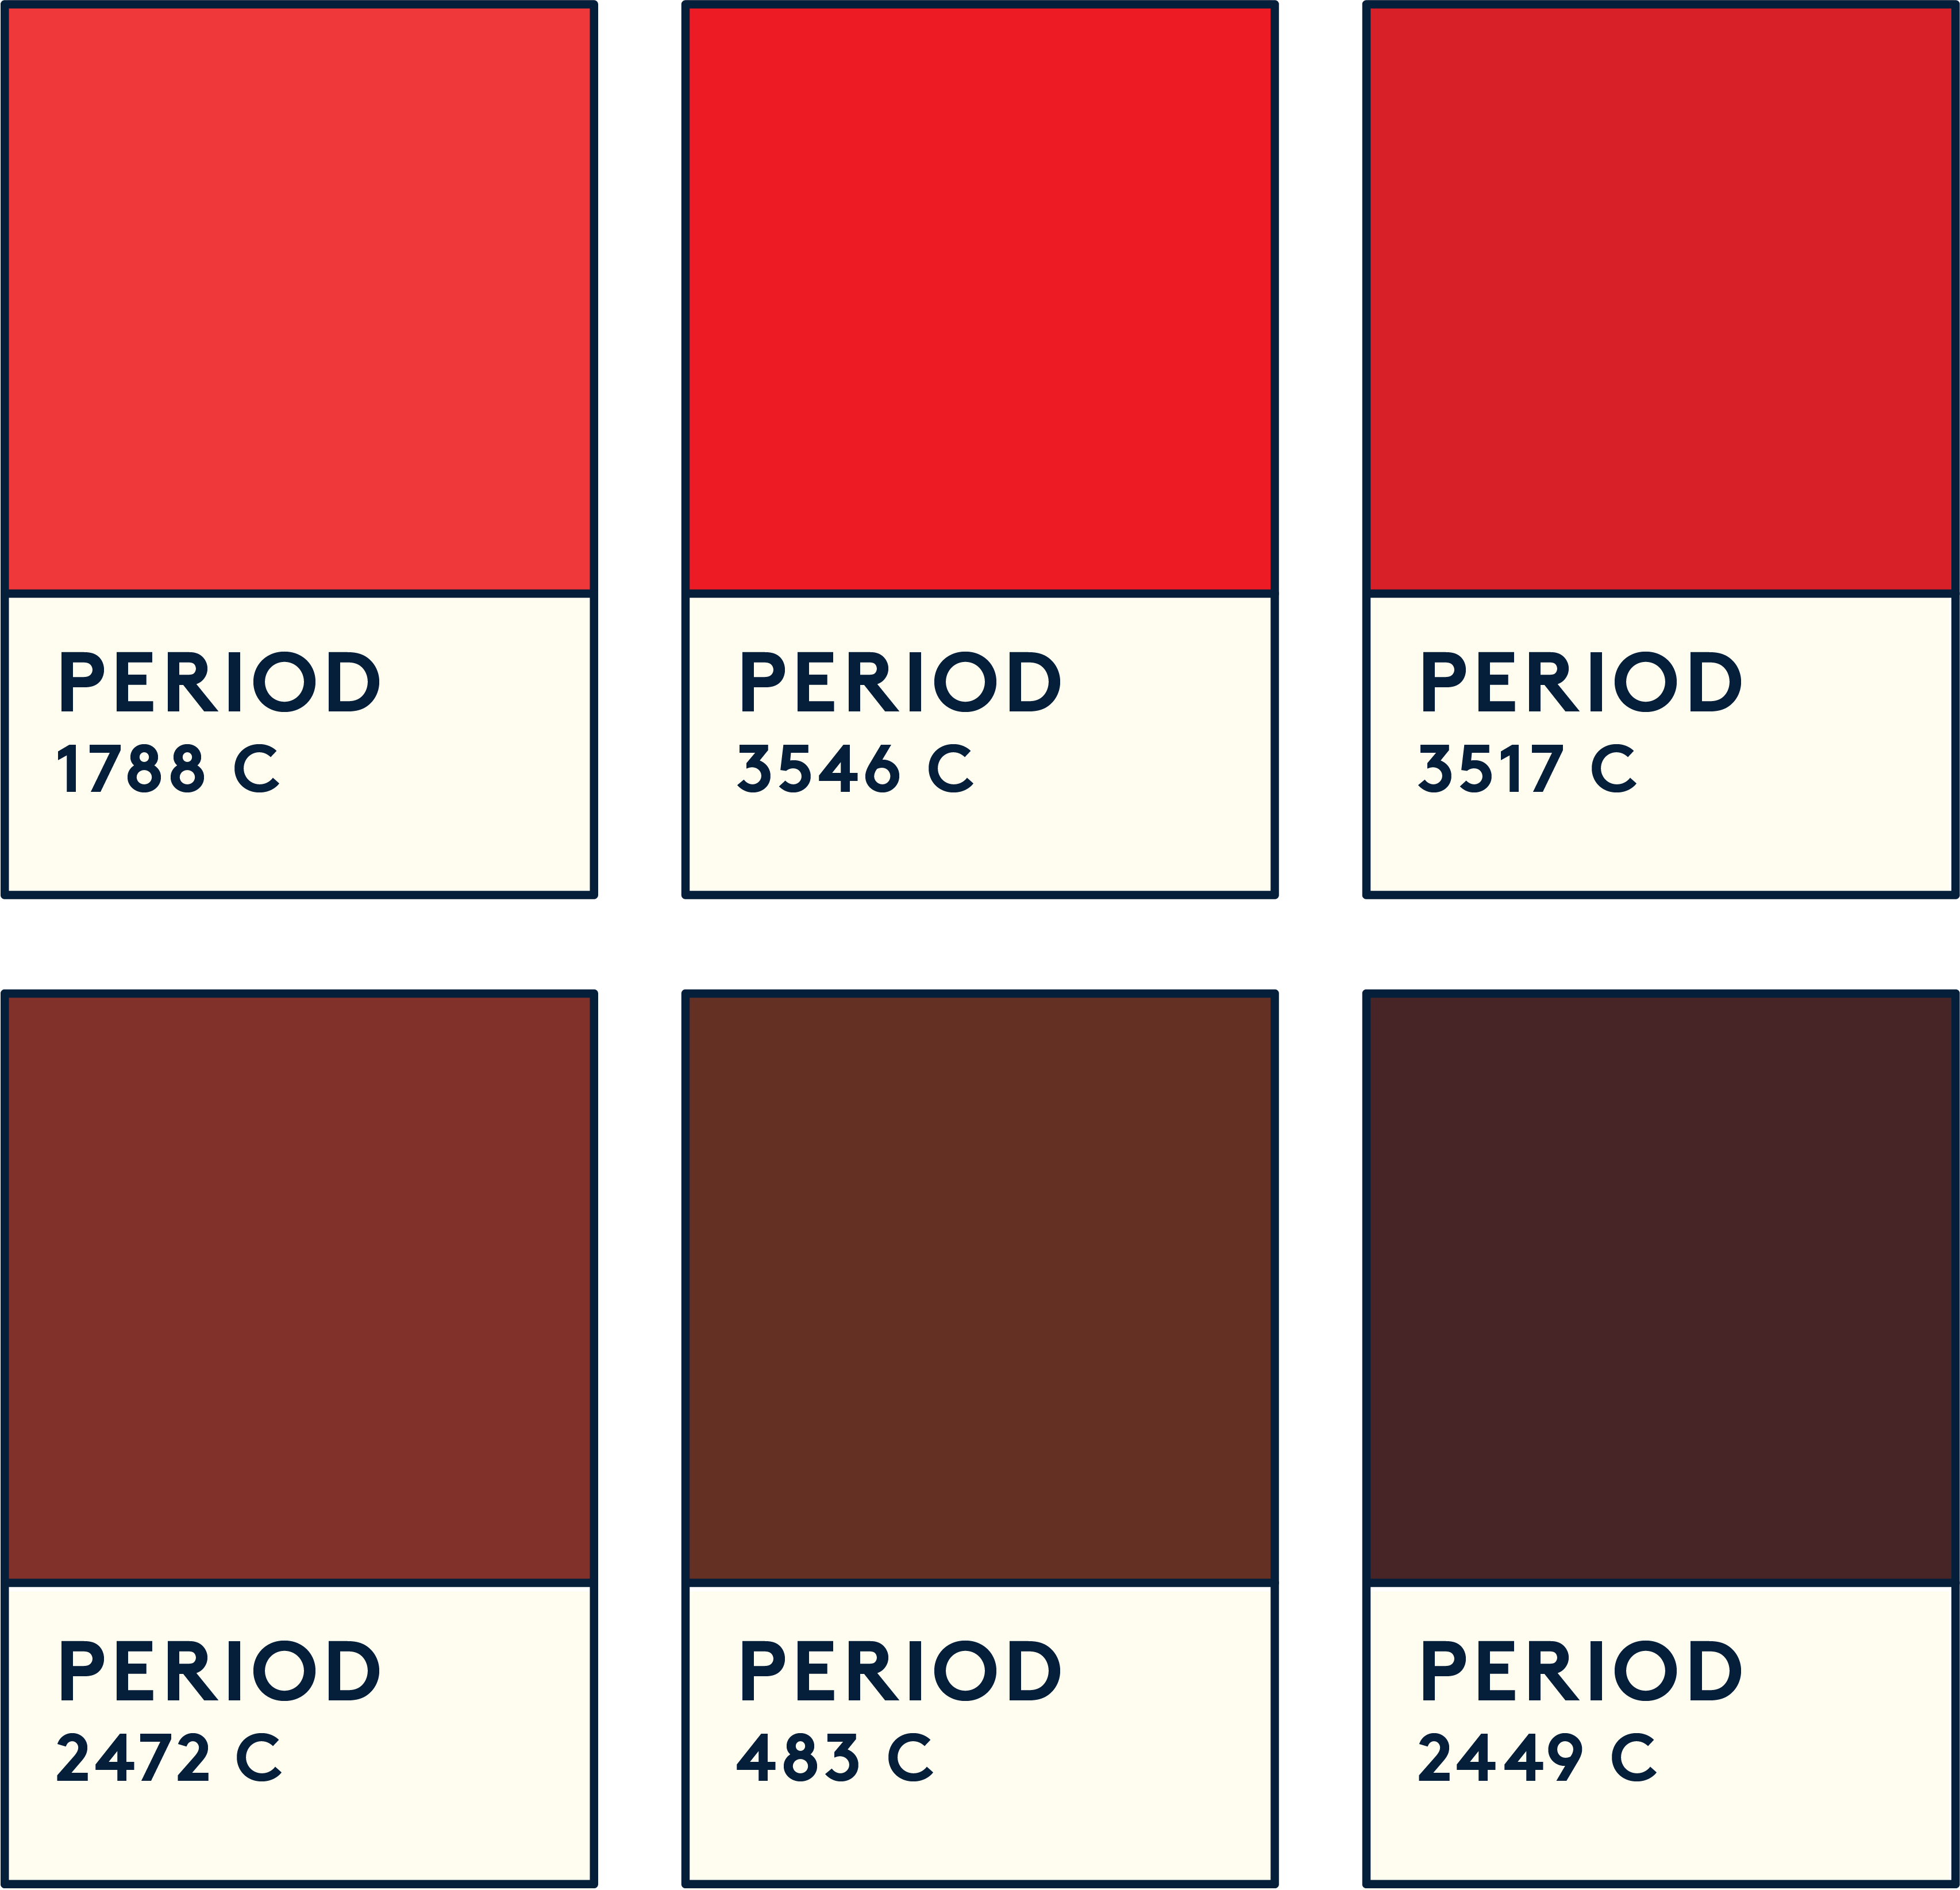 Healthy period blood typically varies from bright red to dark brown or  black. Blood or discharge that is of a darker shades indicates a c